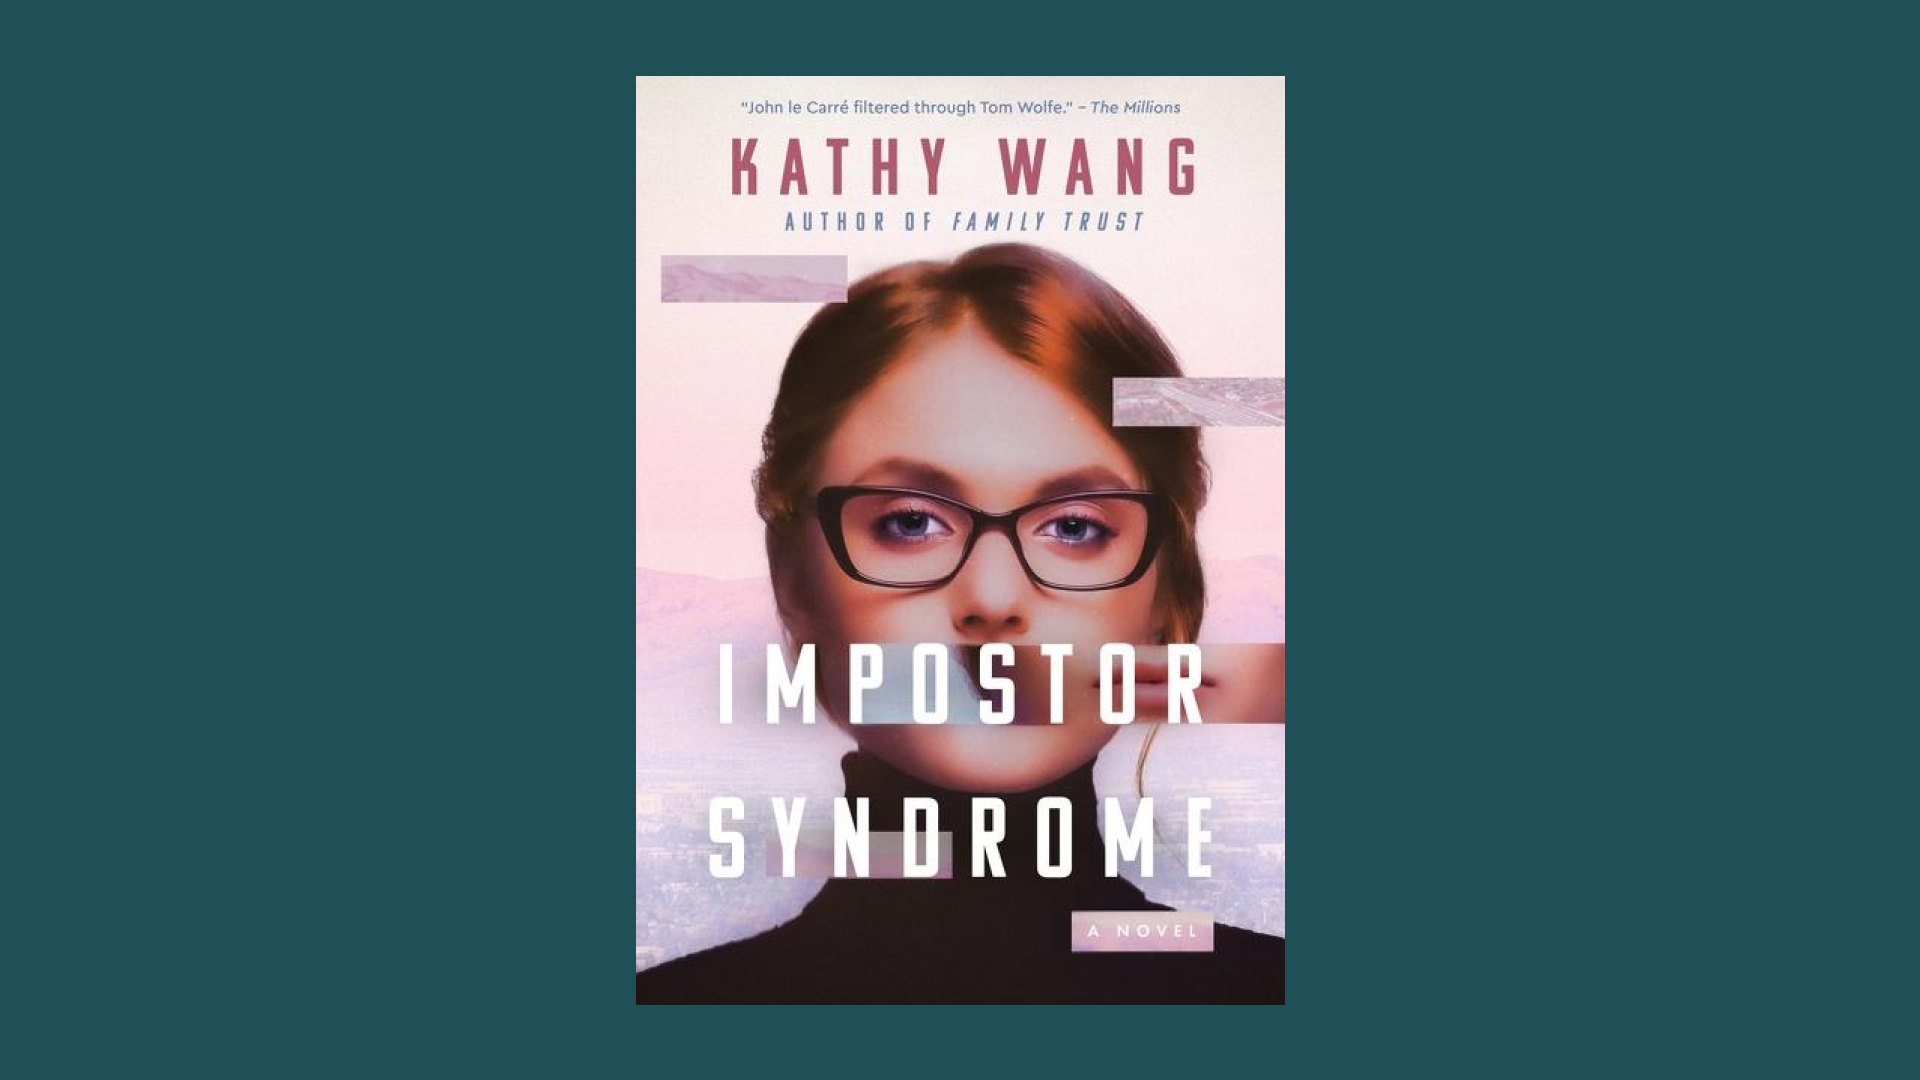 “Impostor Syndrome” by Kathy Wang